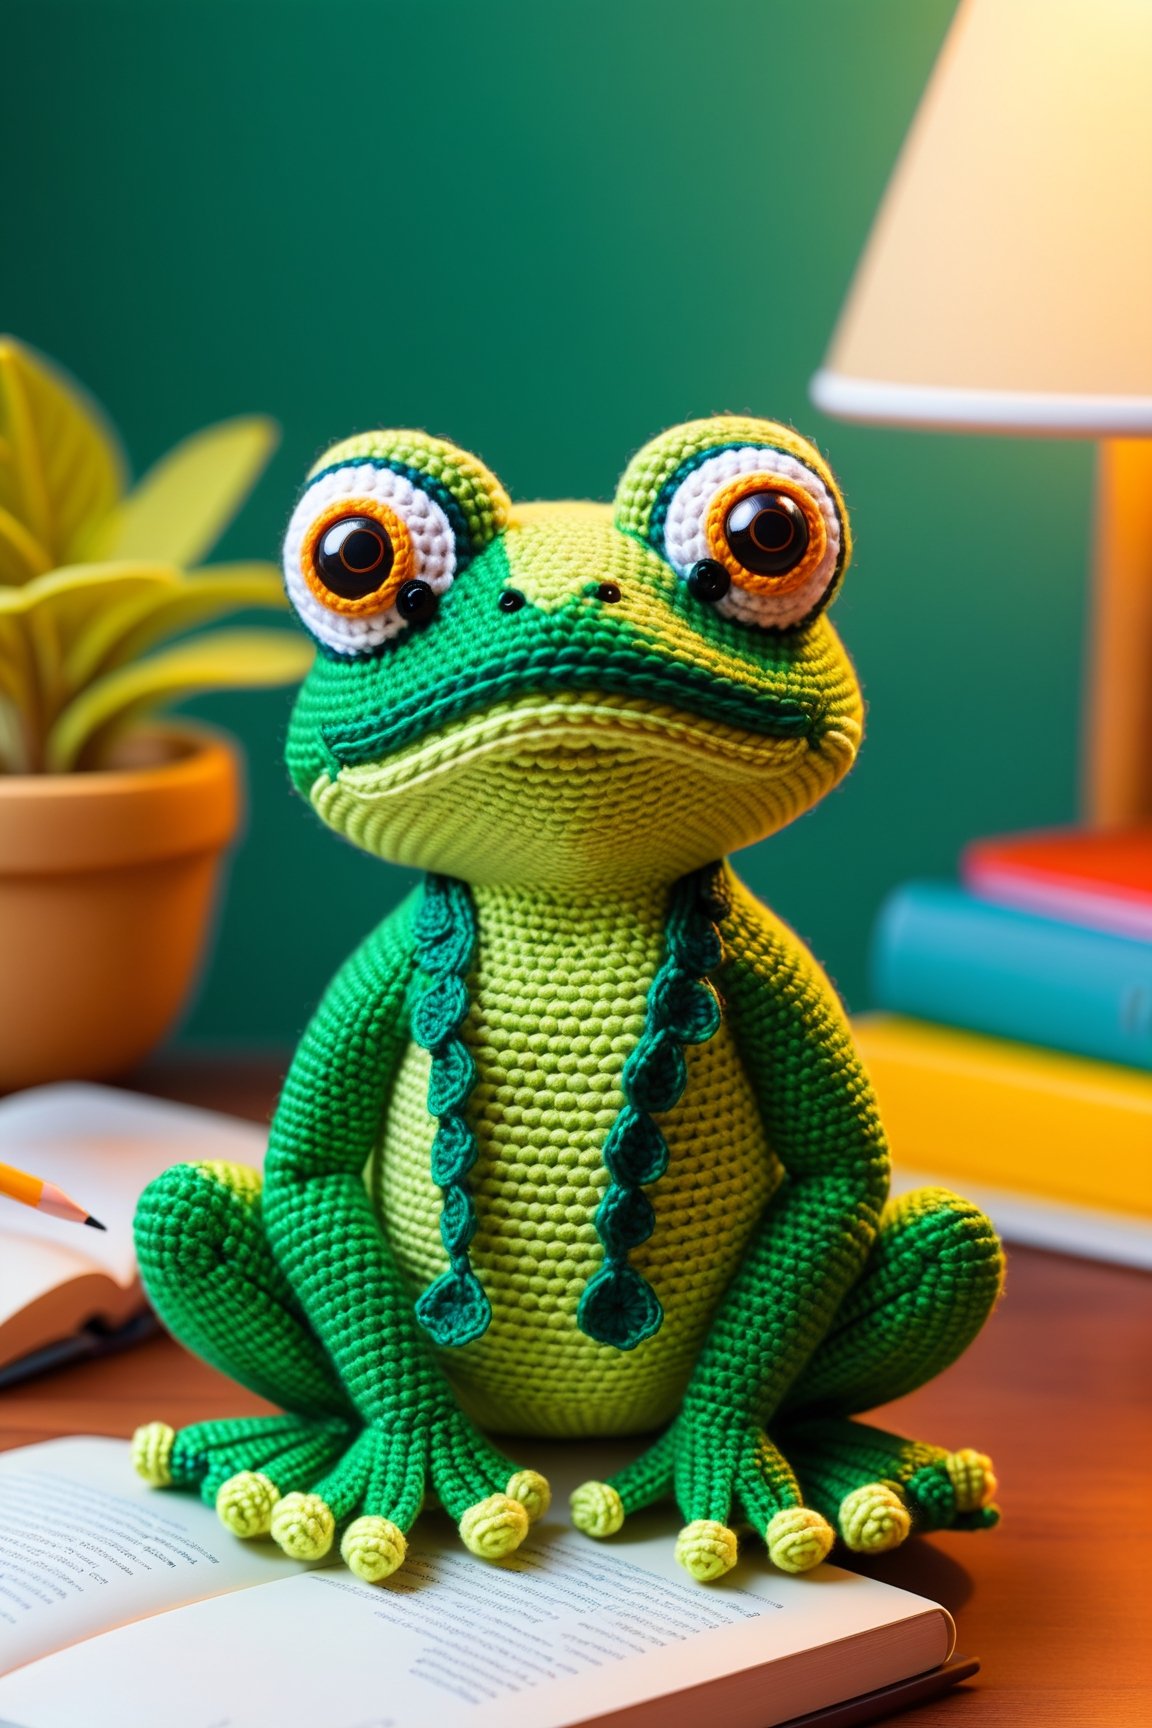 (amigurumi,crocheted,cute,frog,toy),(homework-study desk),(cartoon-style),(vibrant colors),(soft lighting), (realistic texture of the frog)